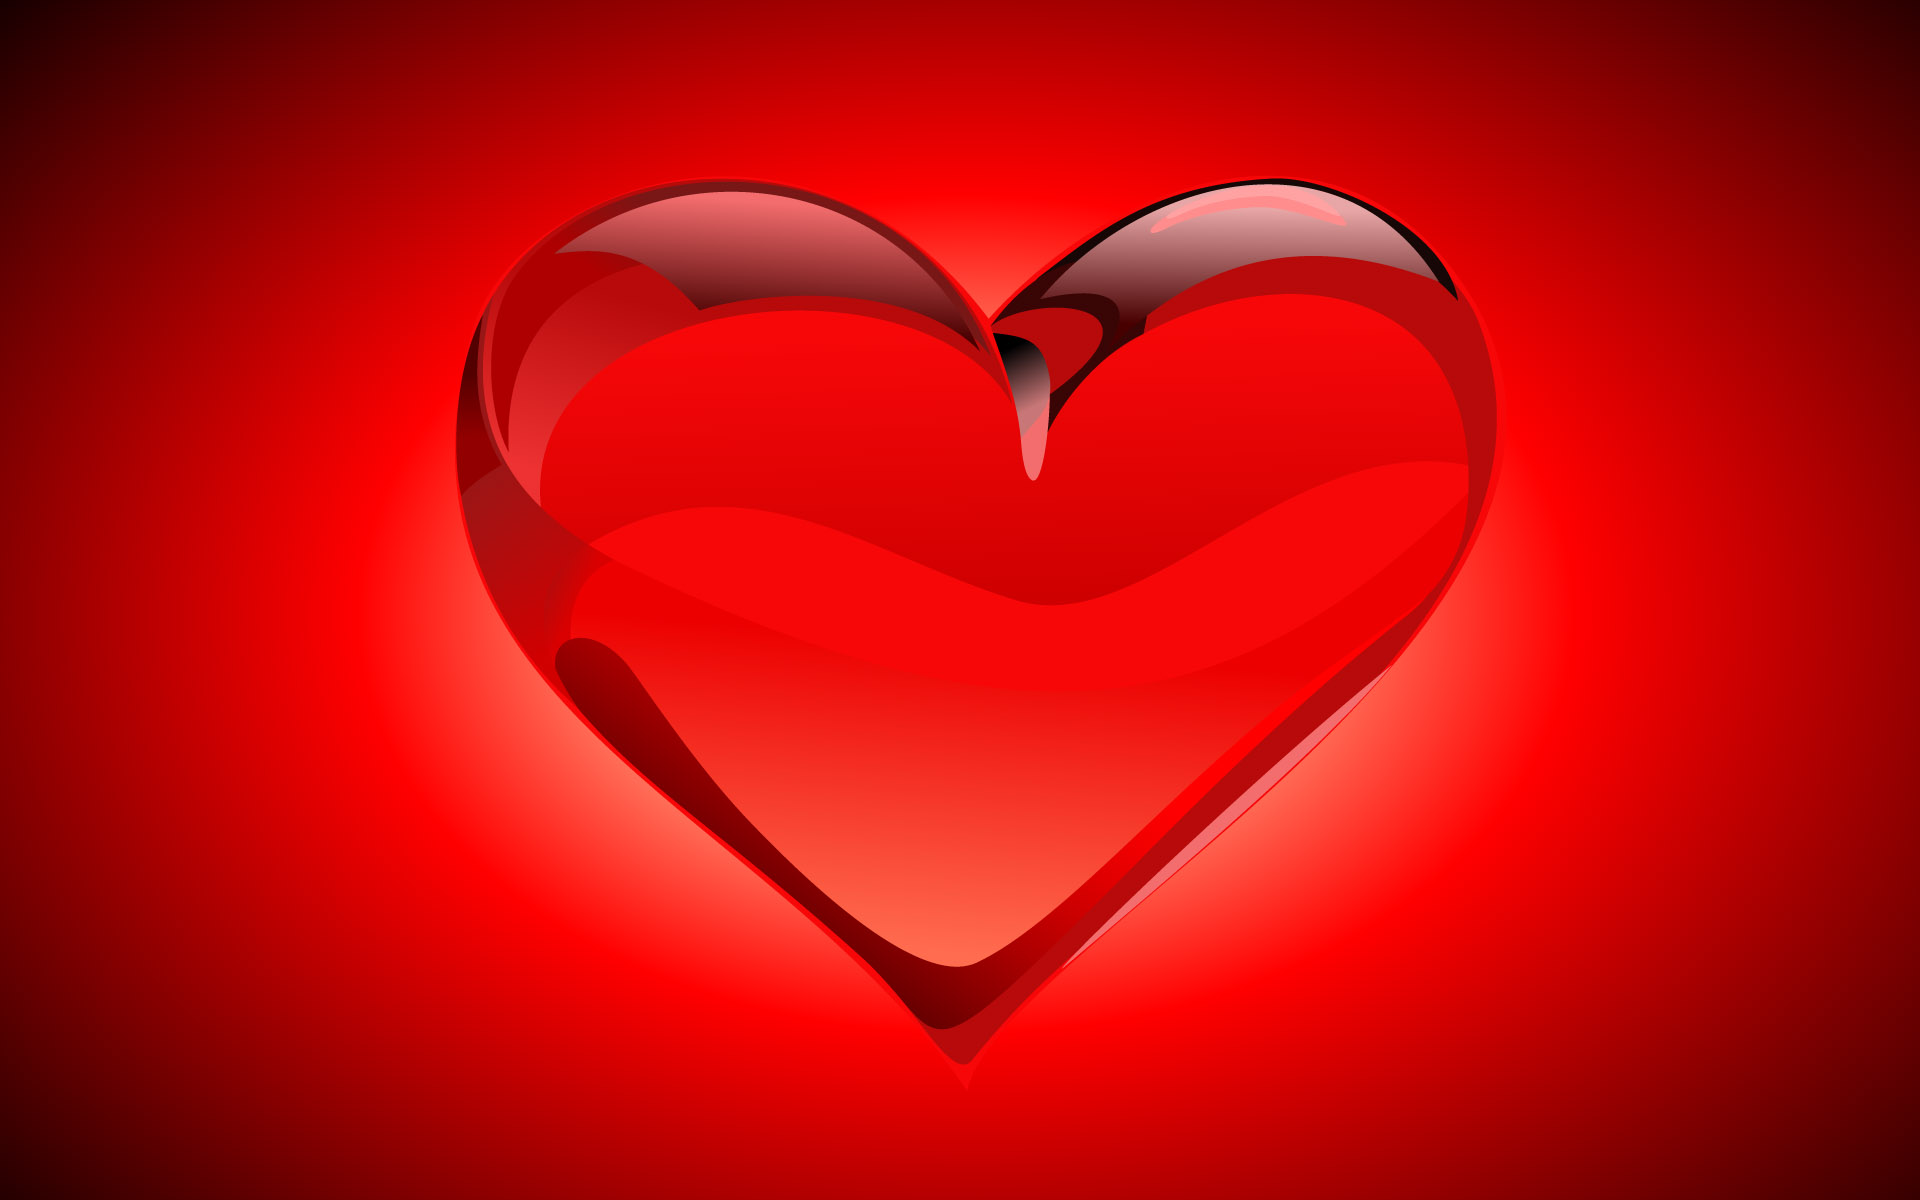 Red Heart Wallpaper 8755 Hd Wallpapers in Love   Imagescicom 1920x1200